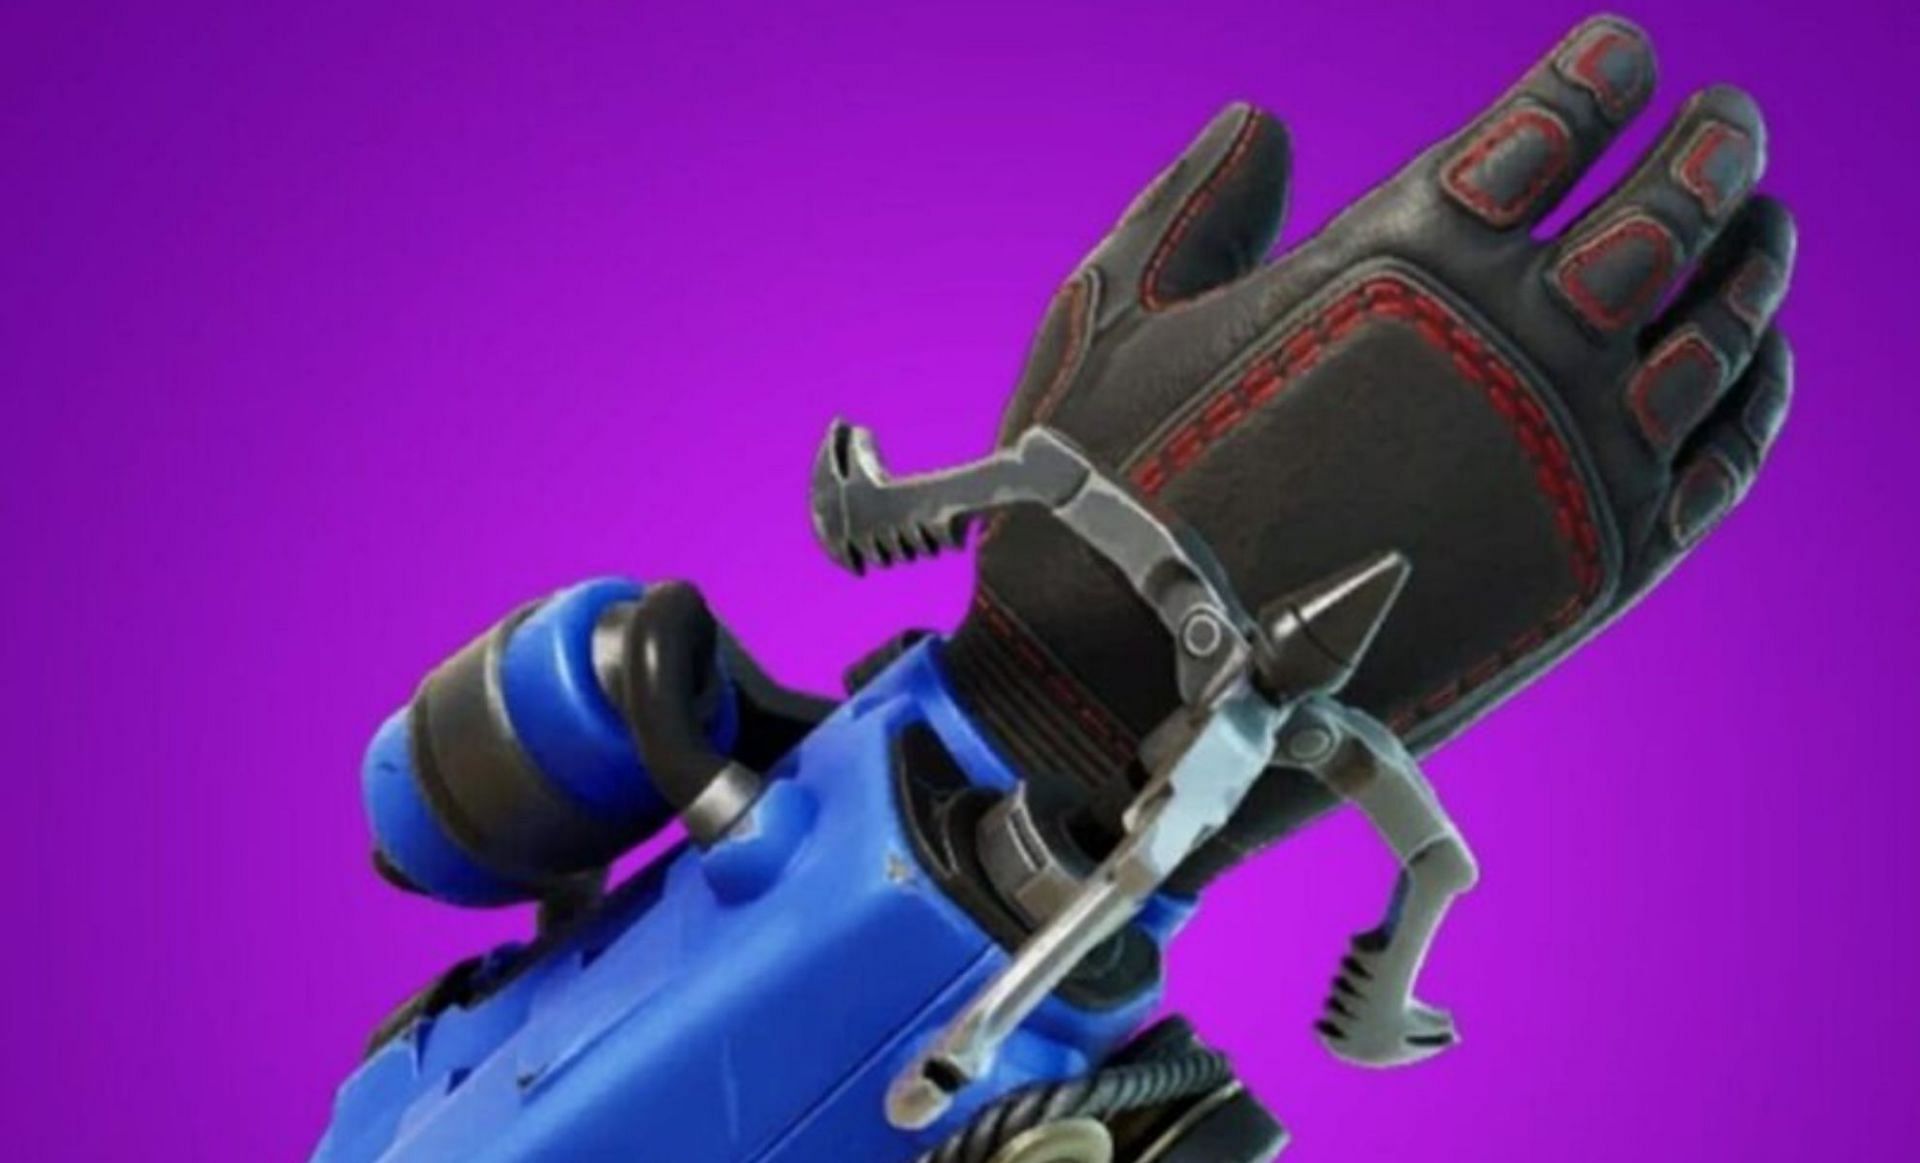 Newest Fortnite update adds Grapple Glove, DMR, and more 